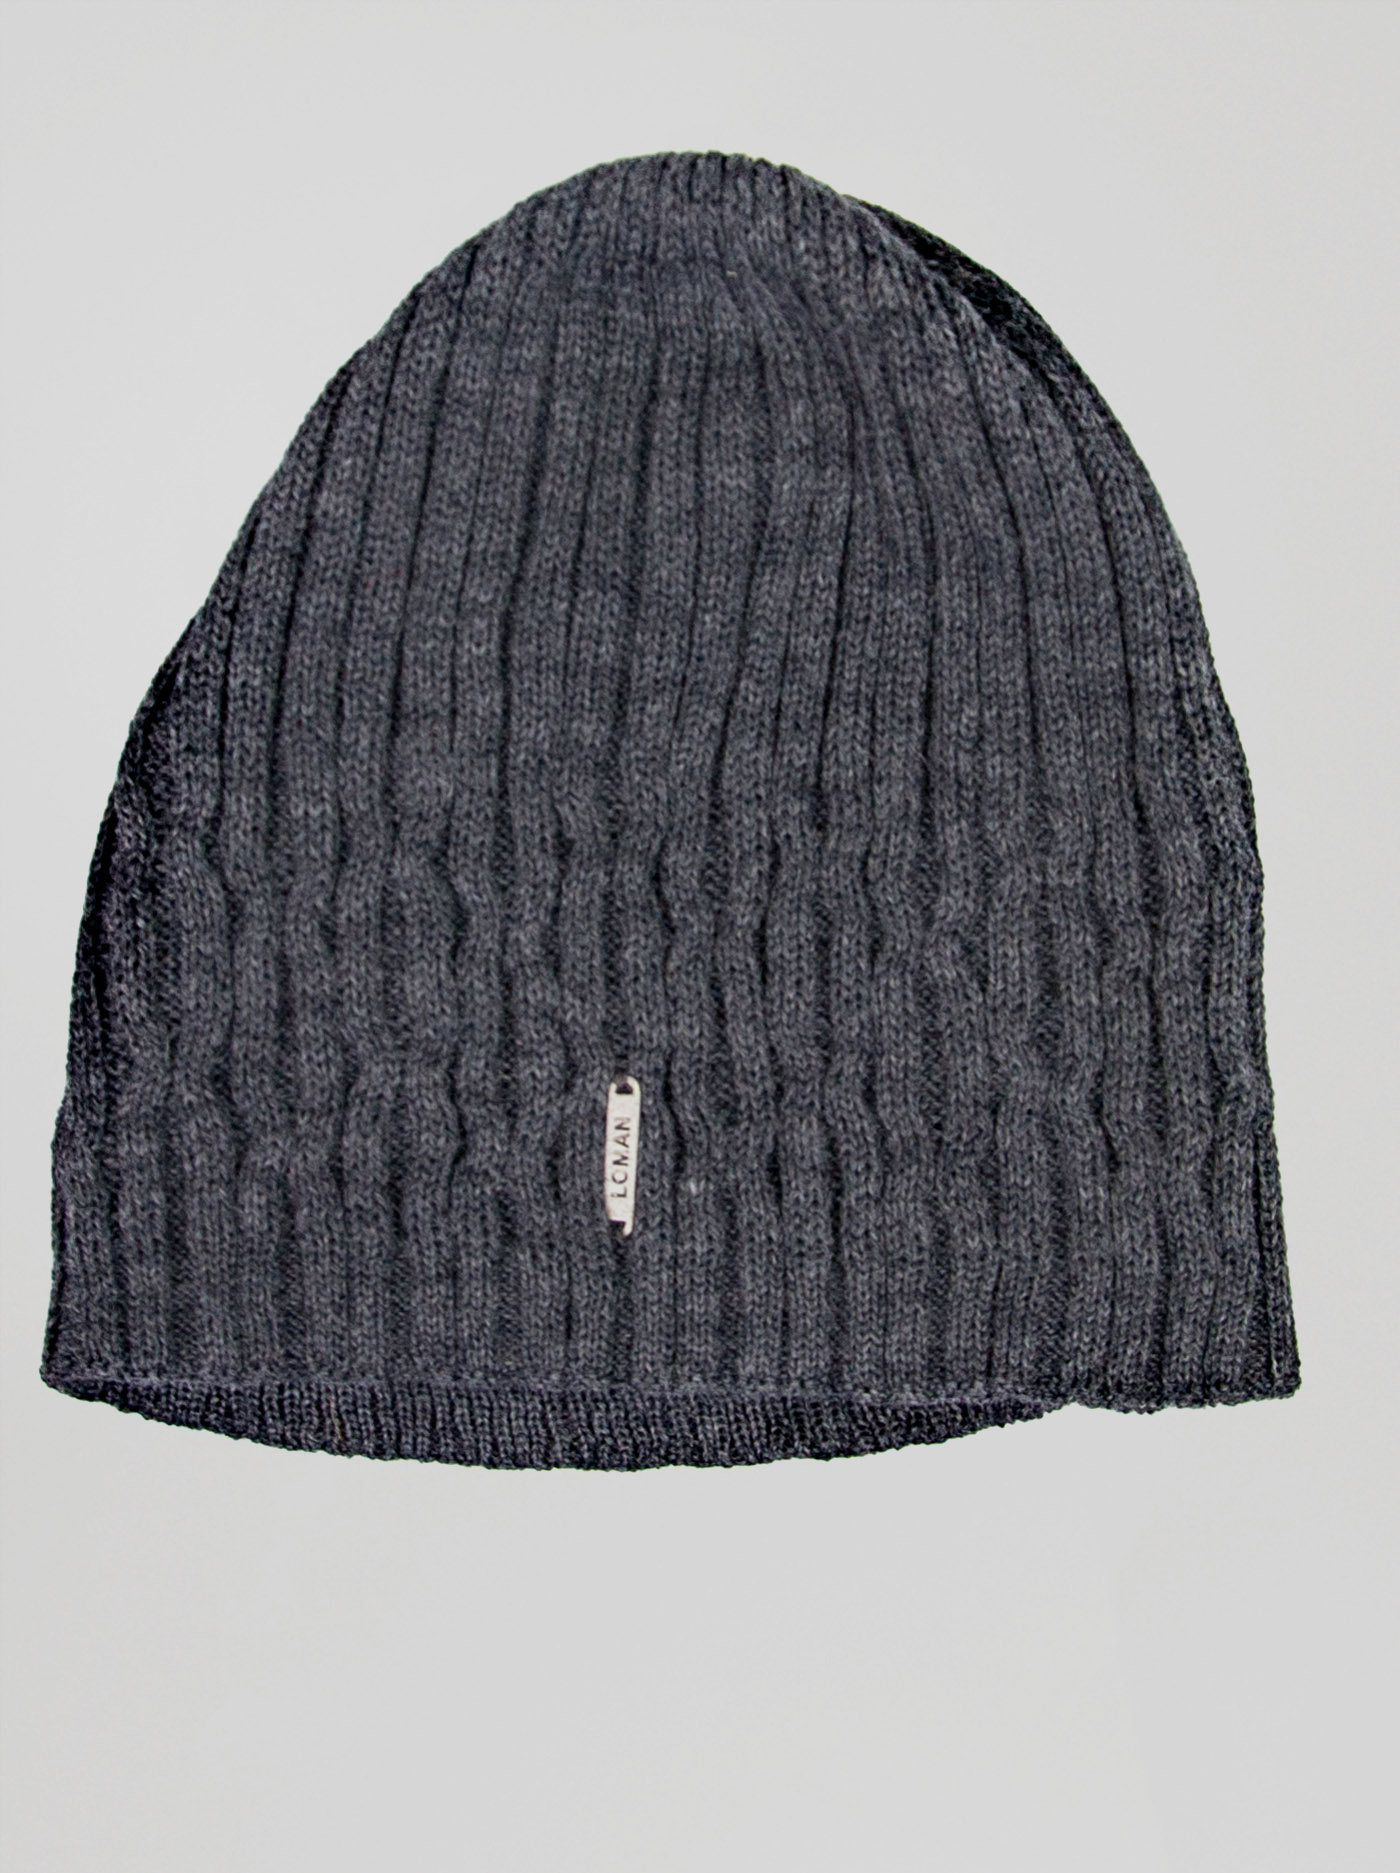 Cap with wool - Loman image 1